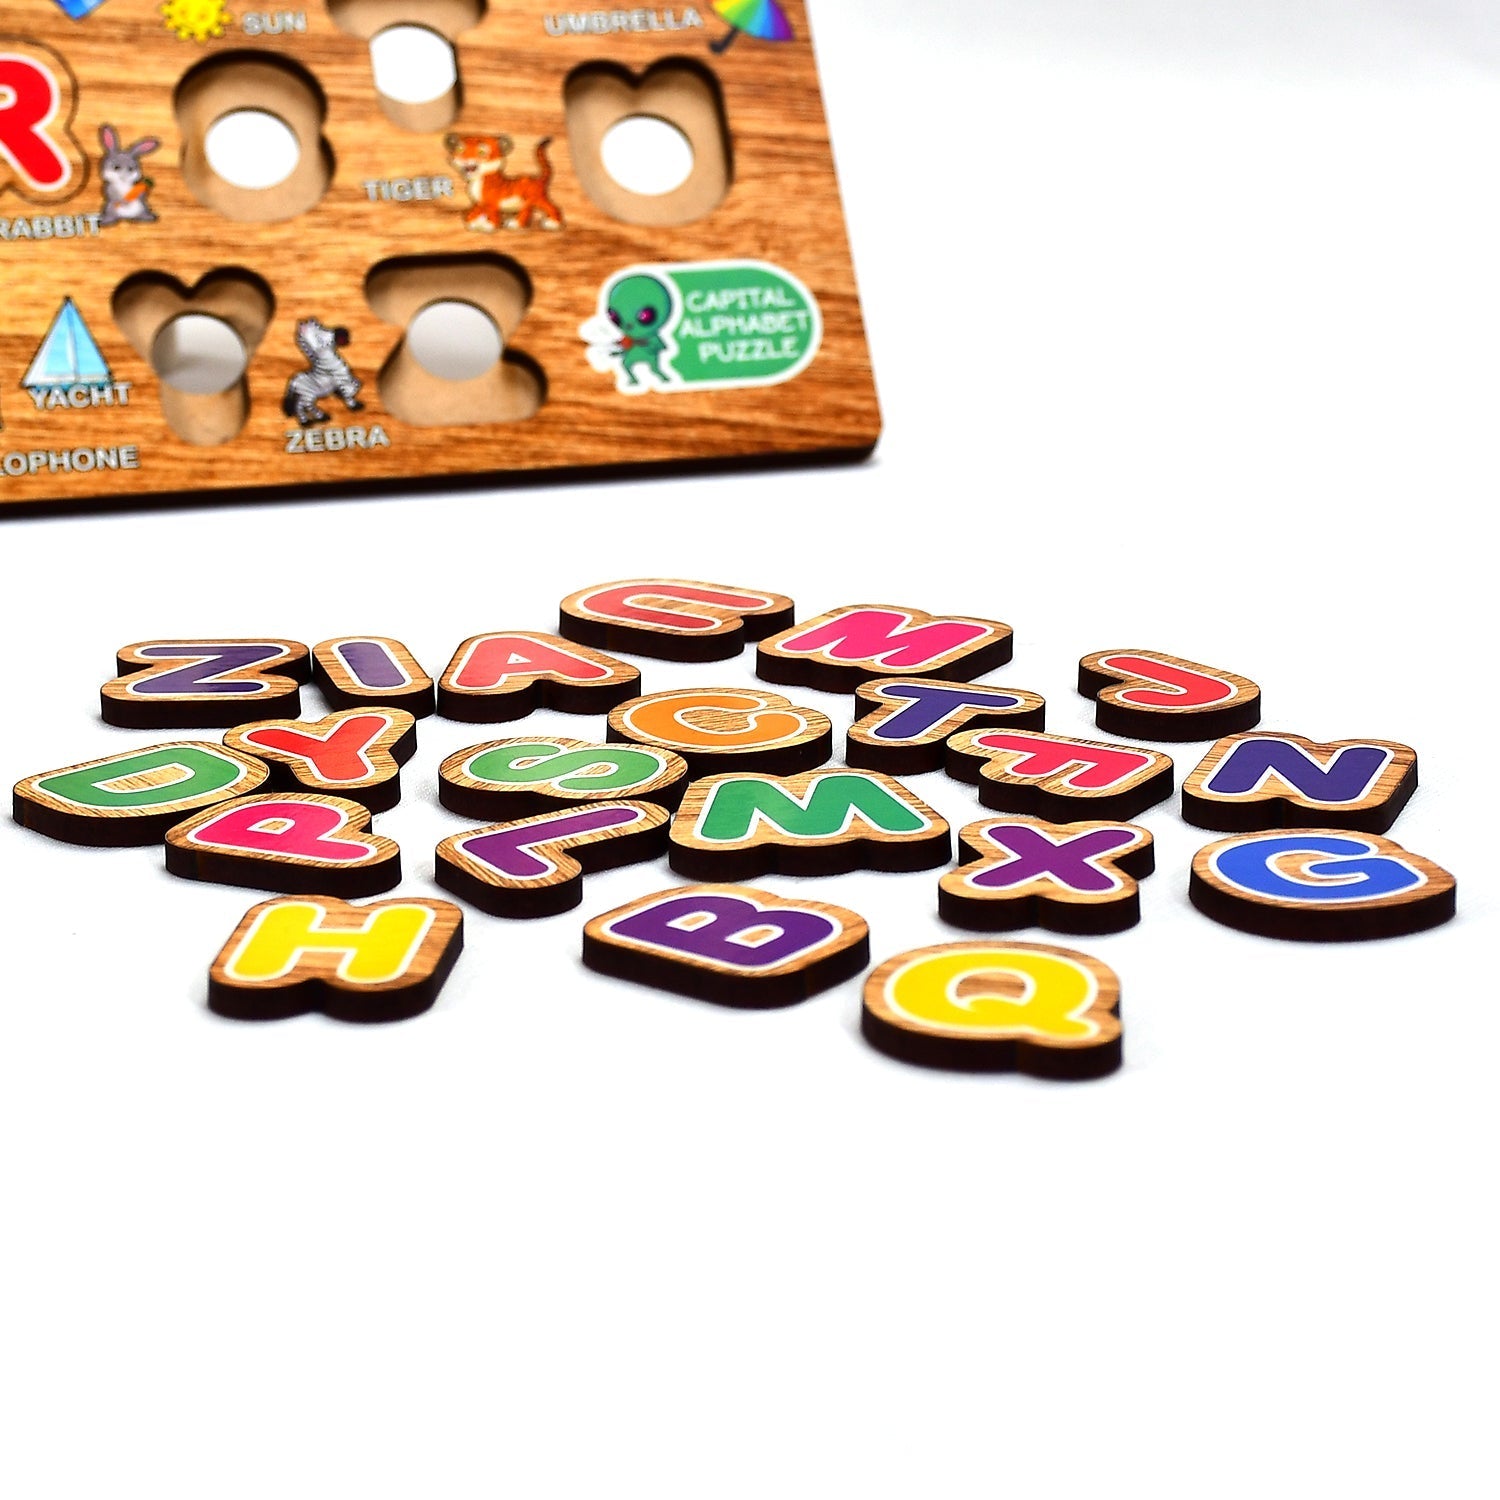 3495 Wooden Capital Alphabets Letters Learning Educational Puzzle Toy for Kids. Amd-